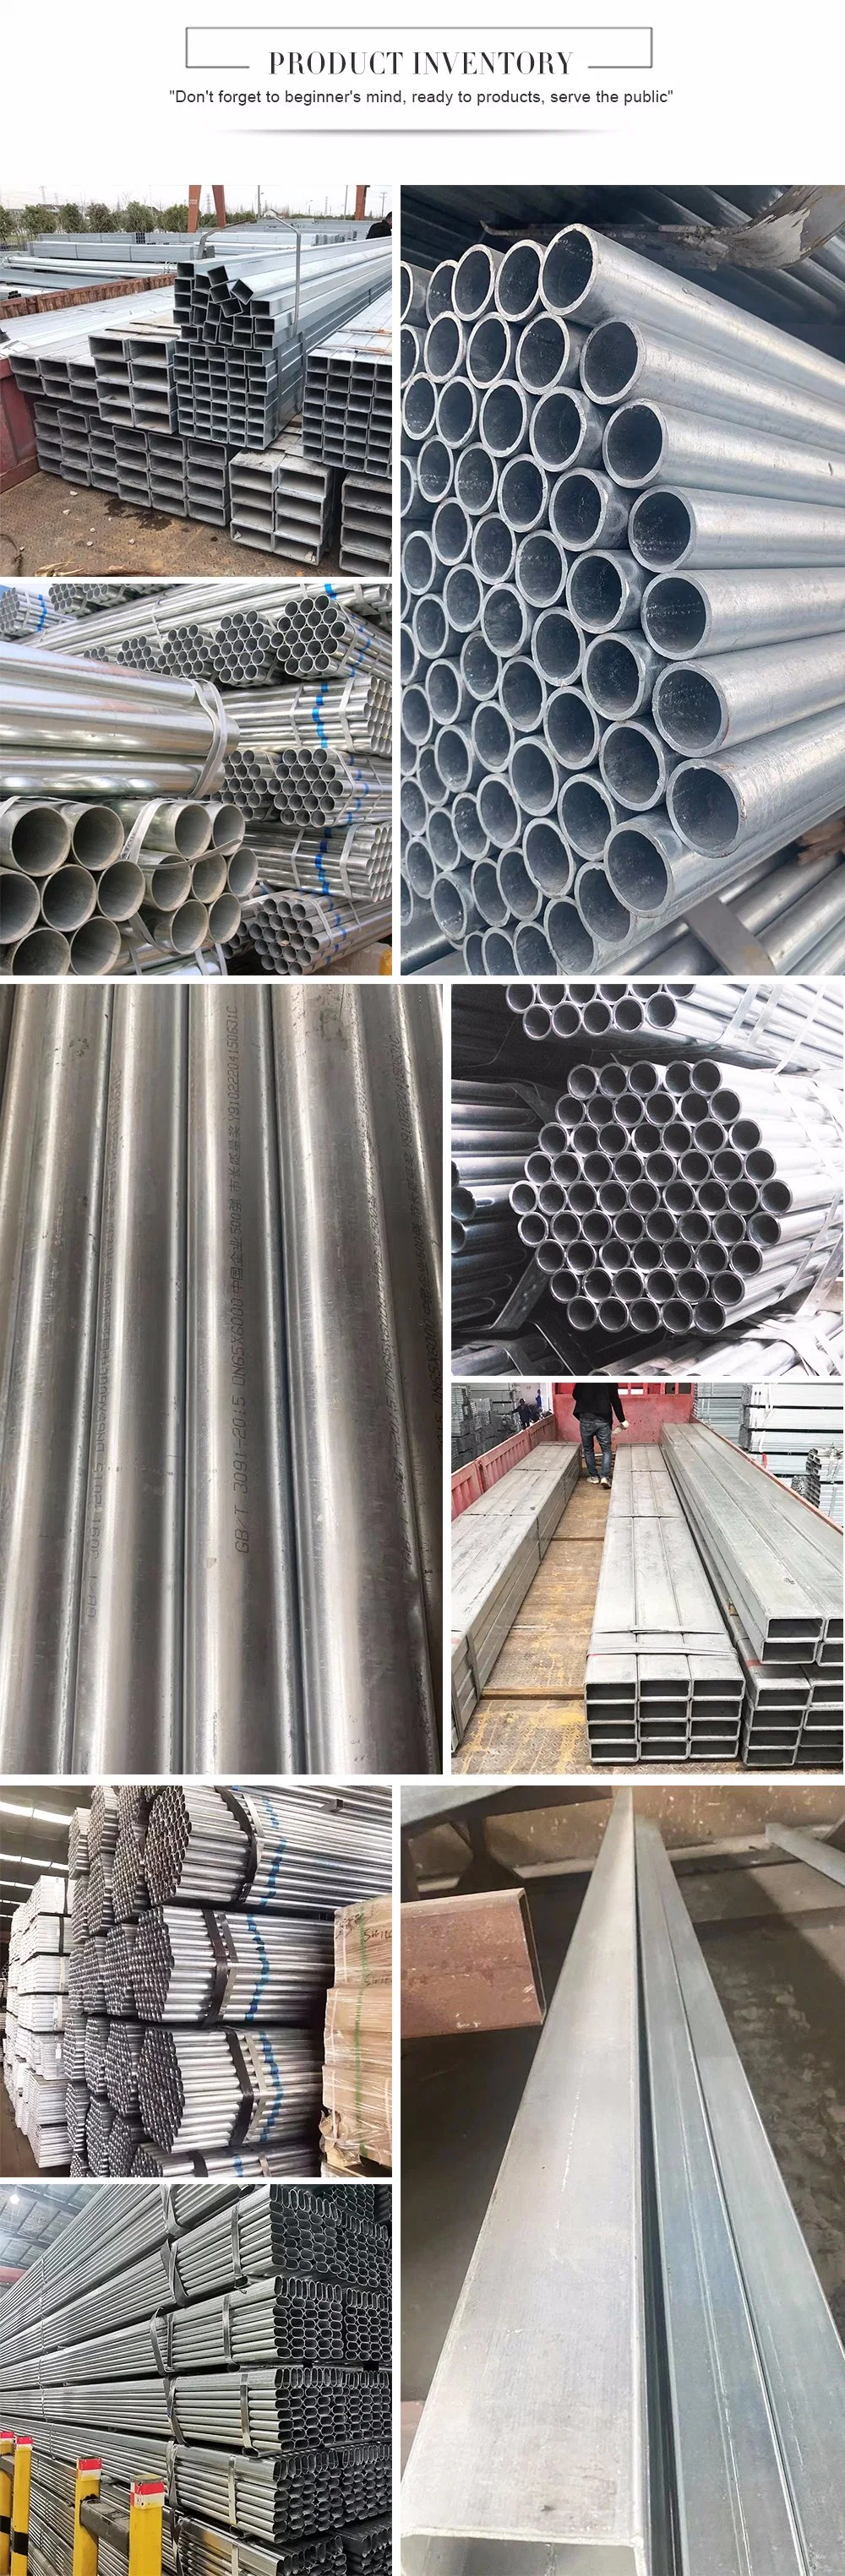 Gi Steel Tube Galvanized Steel Pipe Seamless ERW Spiral Welded Alloy Galvanized Rhs Hollow Section Pipe Square